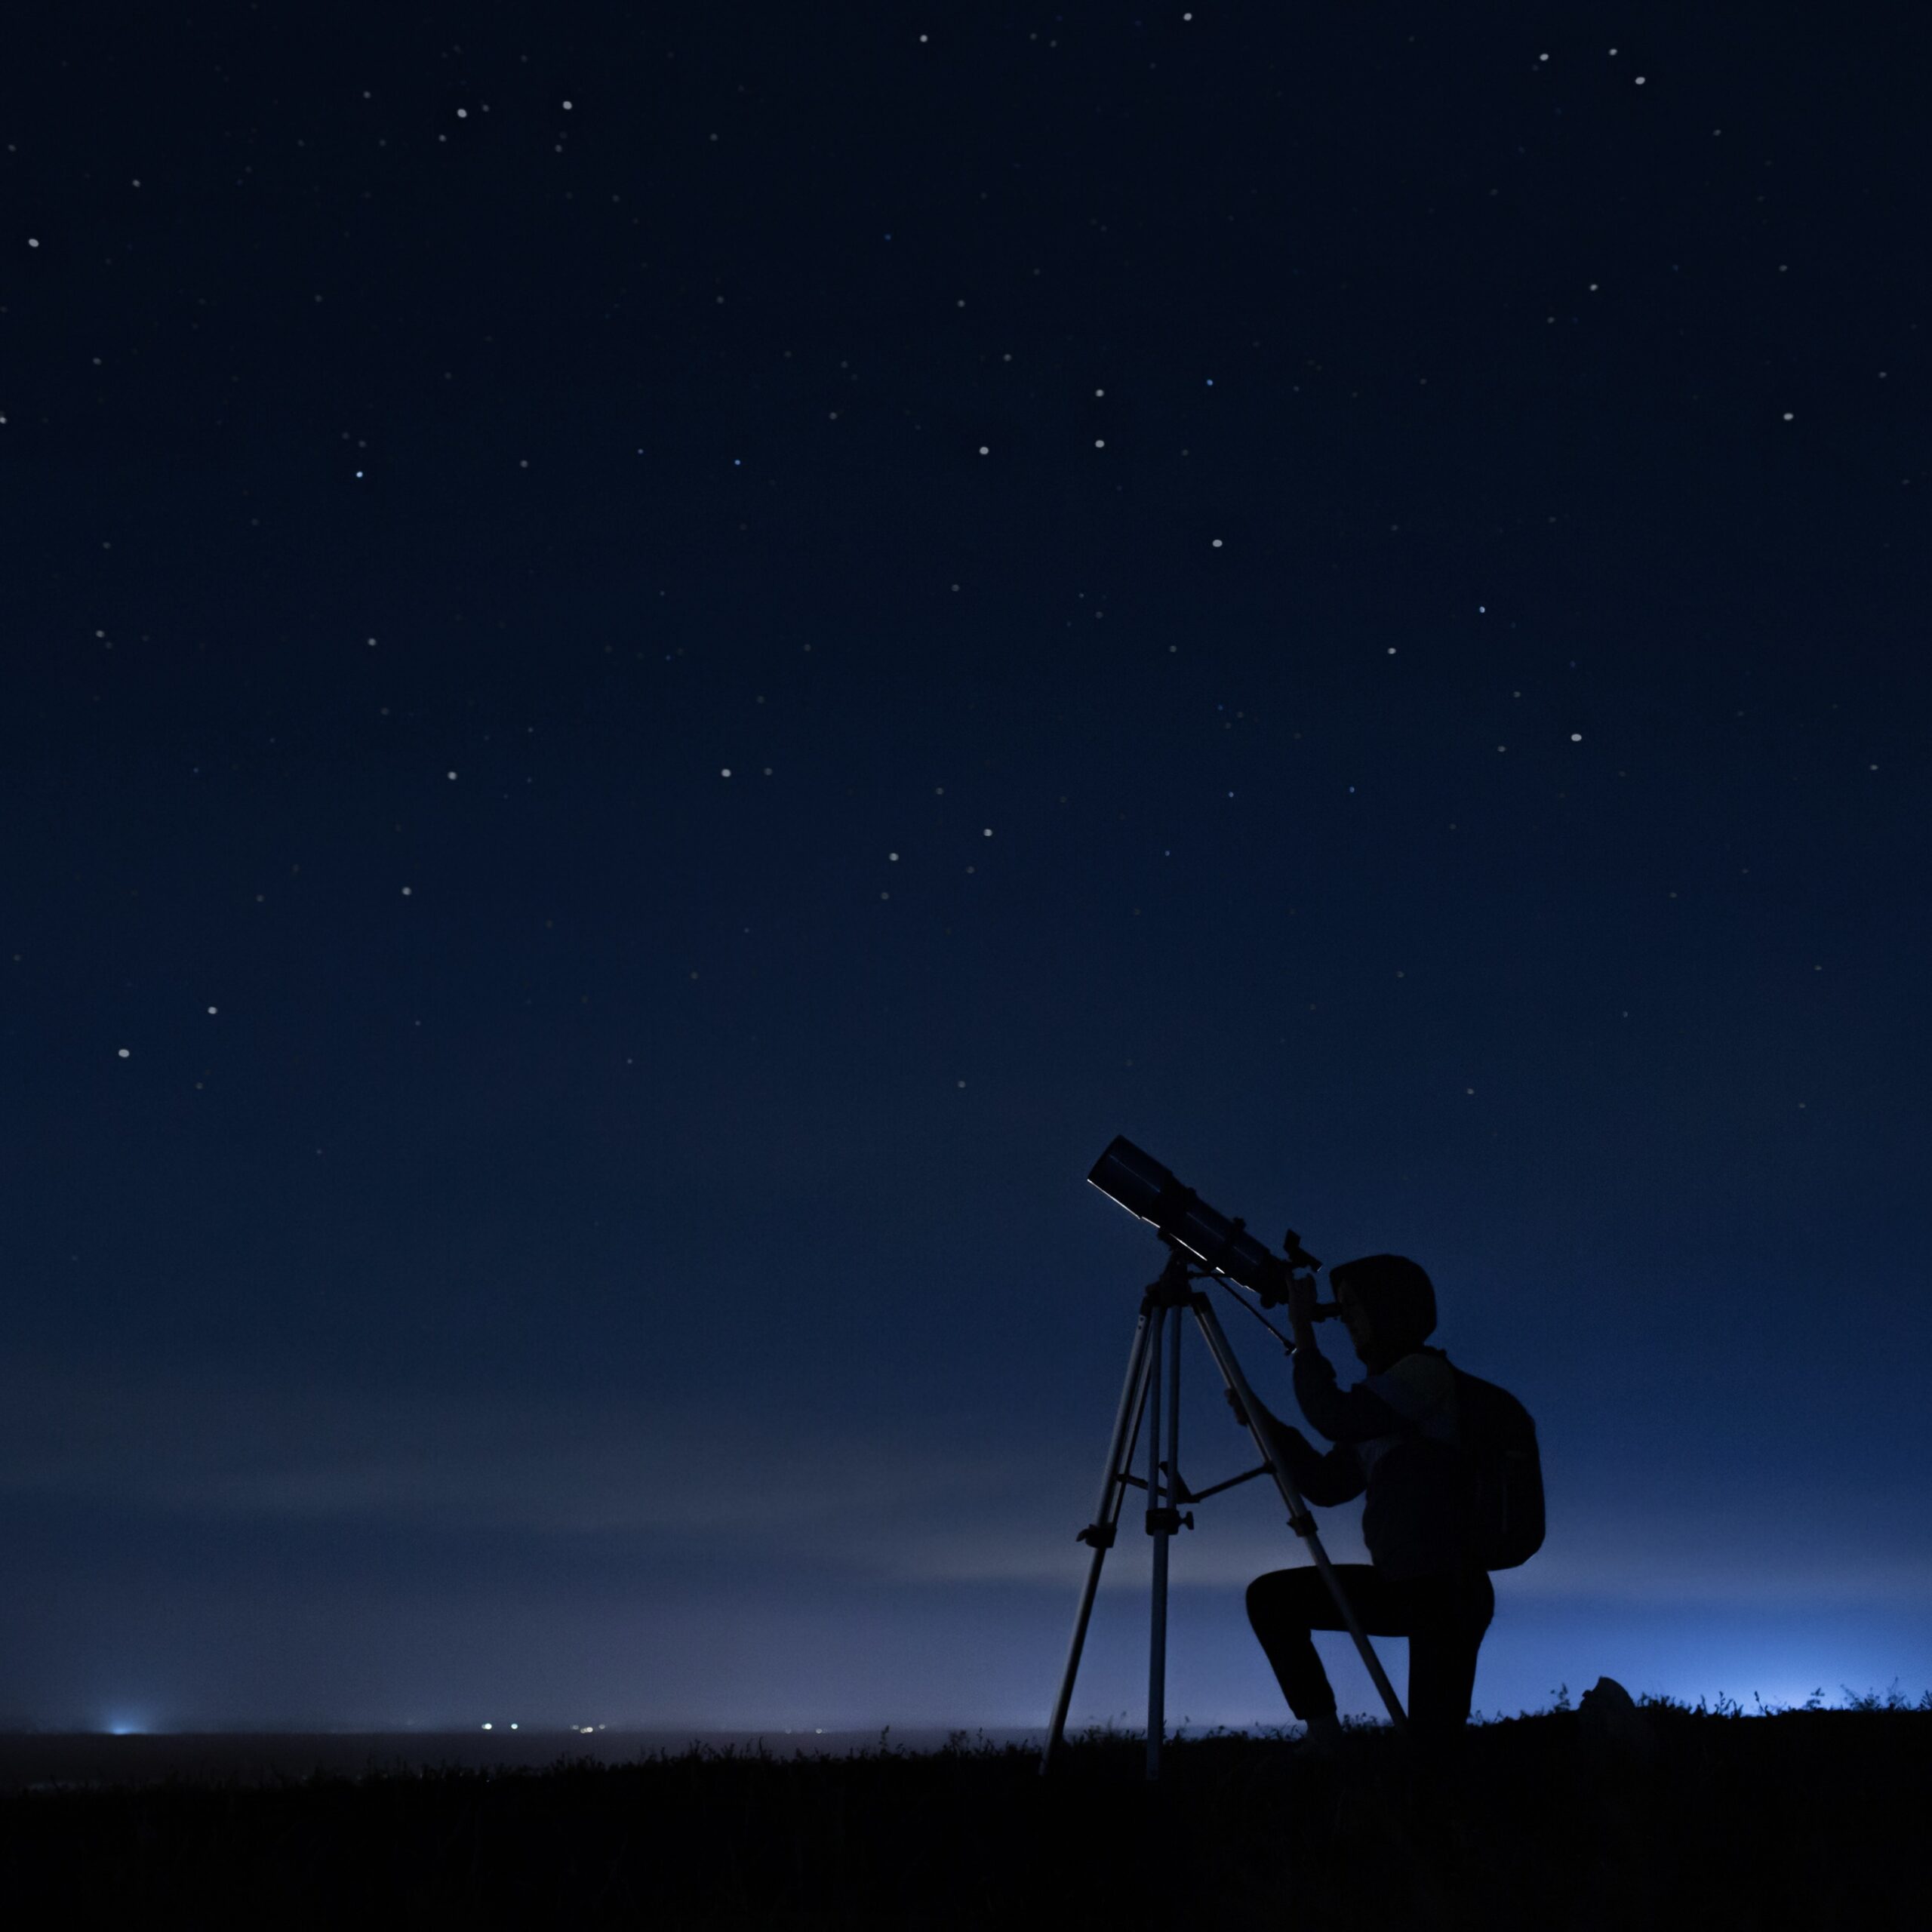 A silhouette of a person kneeling in front of a telescope, aimed at the night sky. The background shows a dark blue night sky with dim stars in the distance.